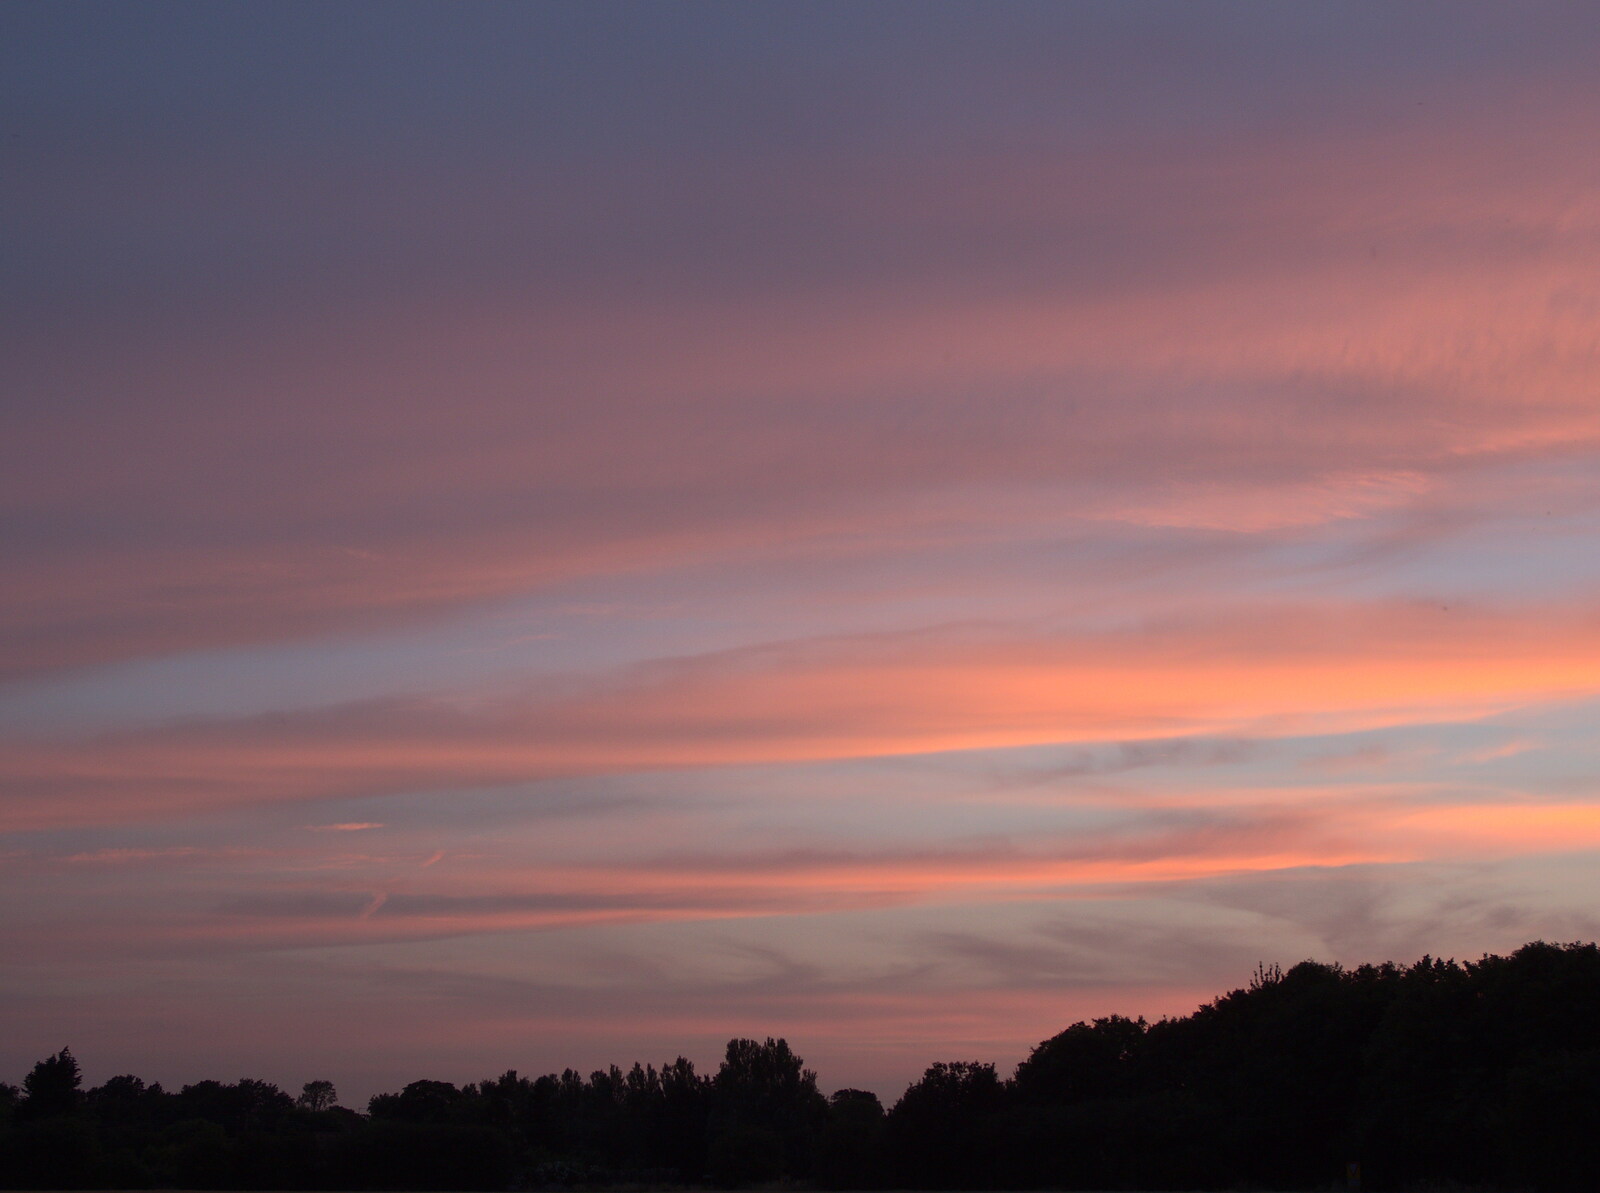 A pink sunset from The Demolition of the Garage, Brome, Suffolk - 17th July 2013